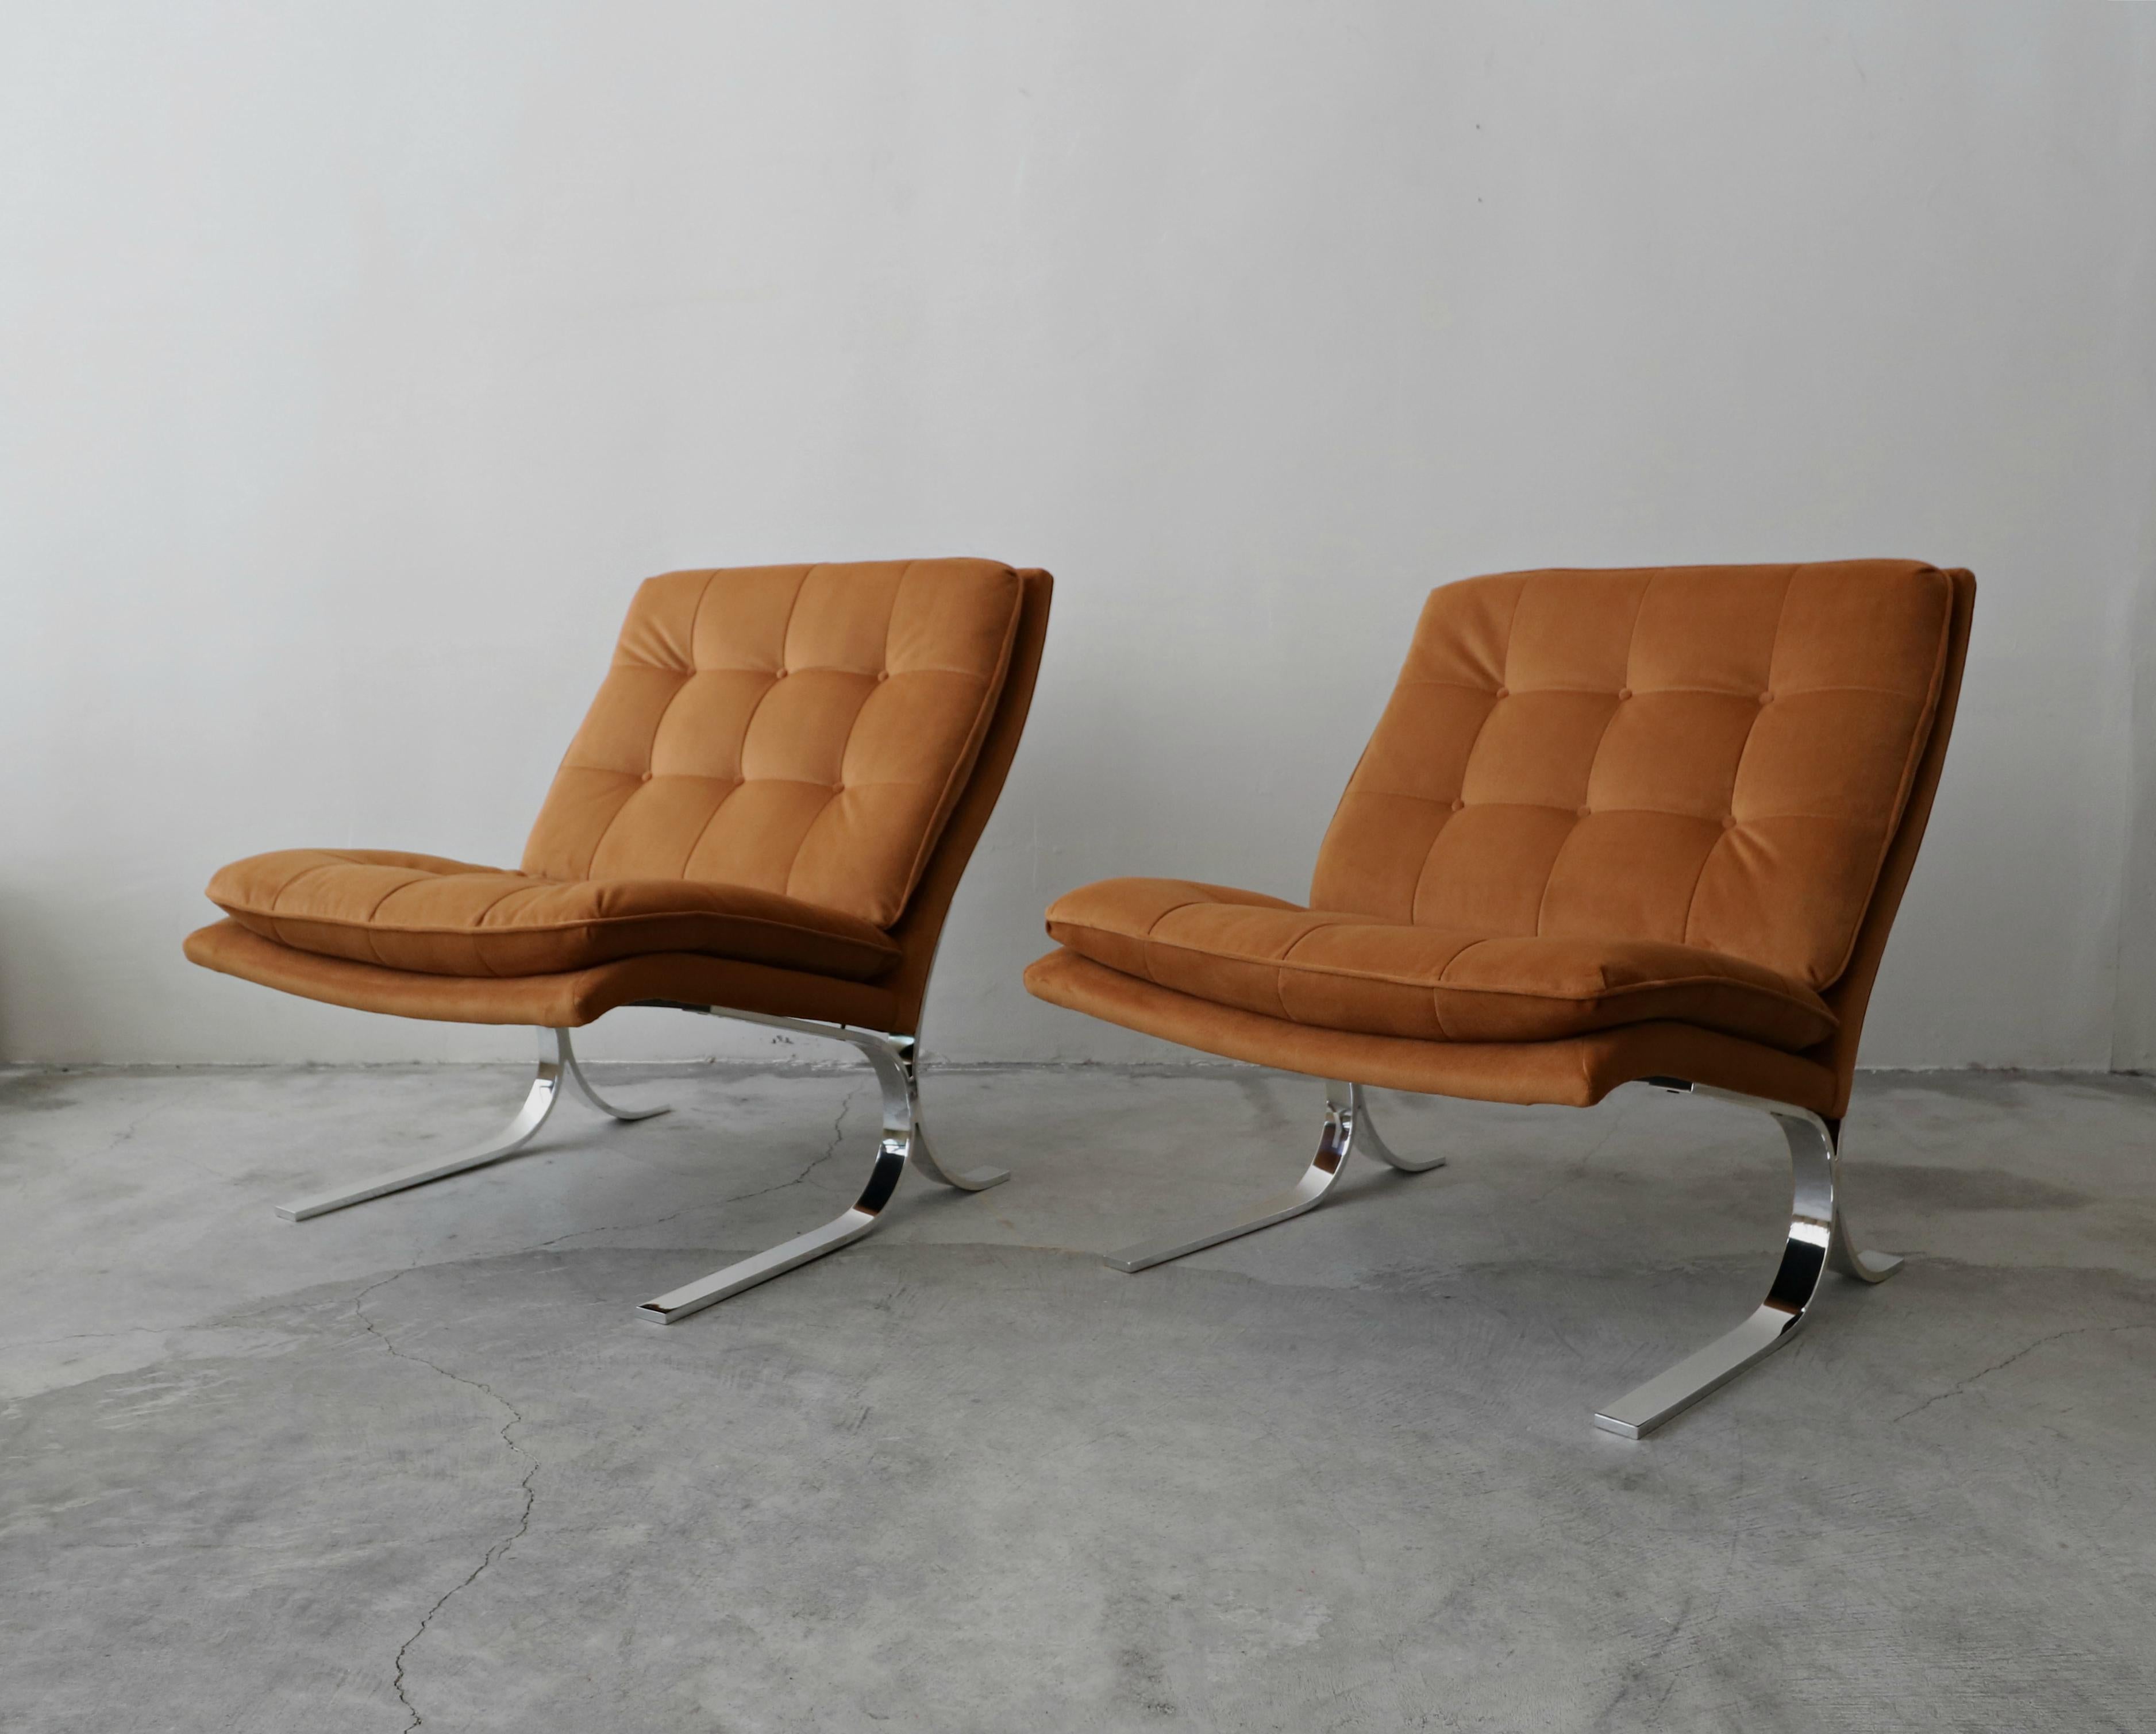 Beautiful pair of midcentury chrome slipper chairs. Chairs are reminiscent of the iconic Barcelona chair. These chairs are substantial in size and have the most beautiful profile.

They have been professionally reupholstered with all new foam and